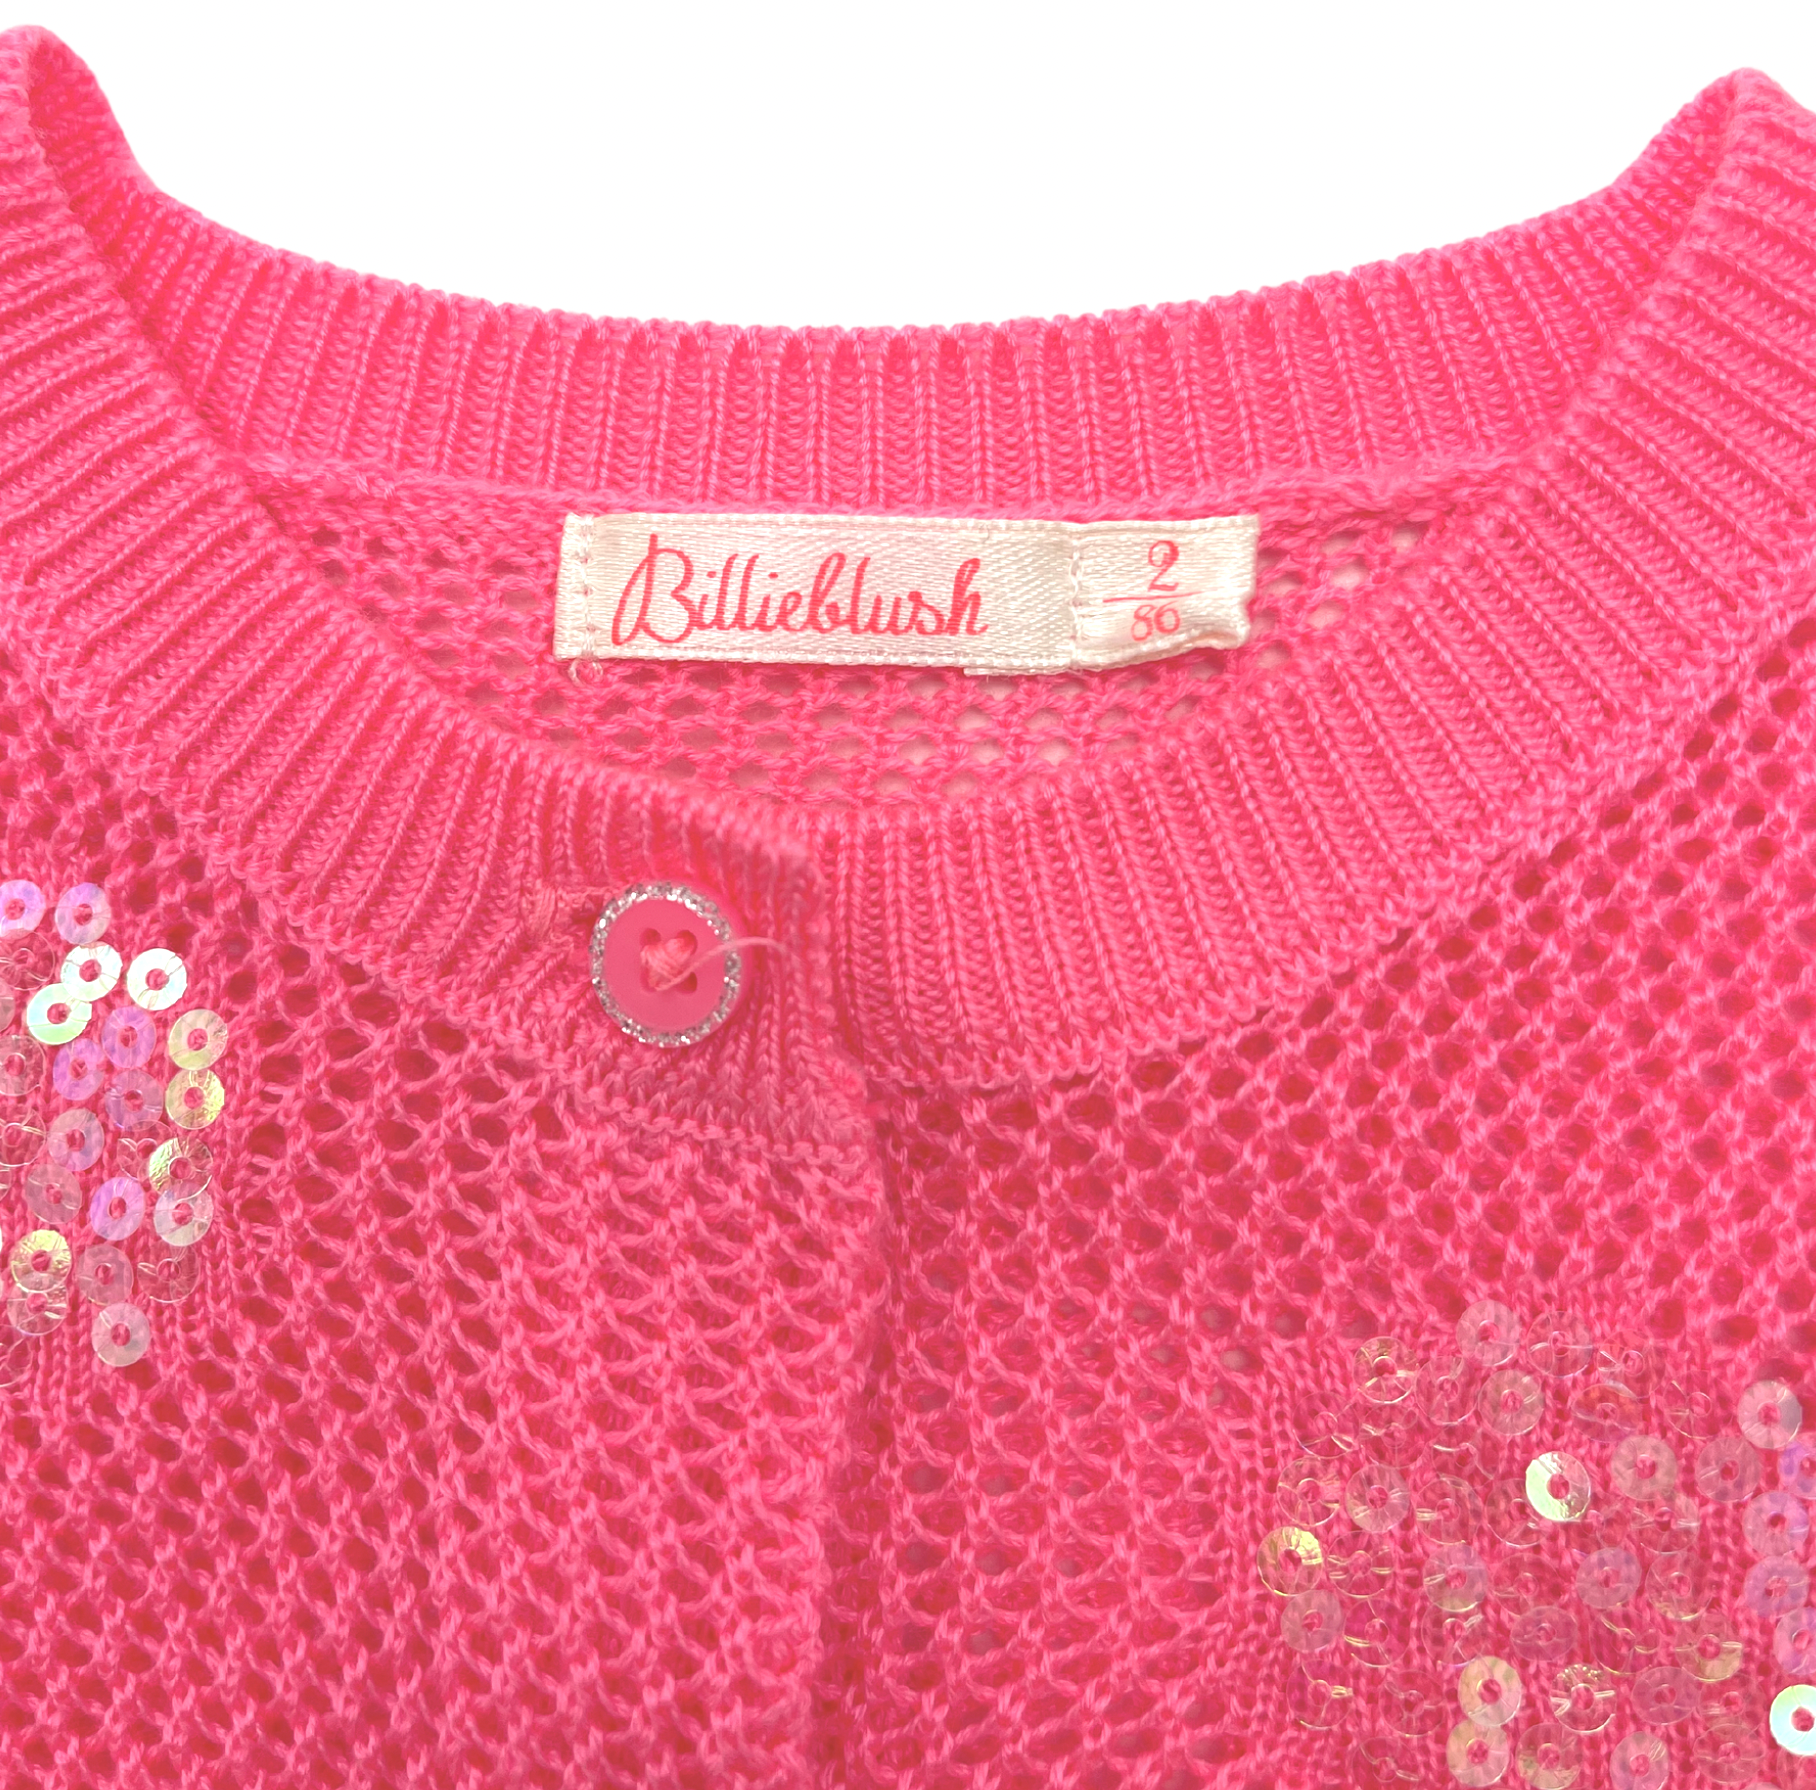 BILLIE BLUSH - Pink cardigan with sequin hearts - 2 years old